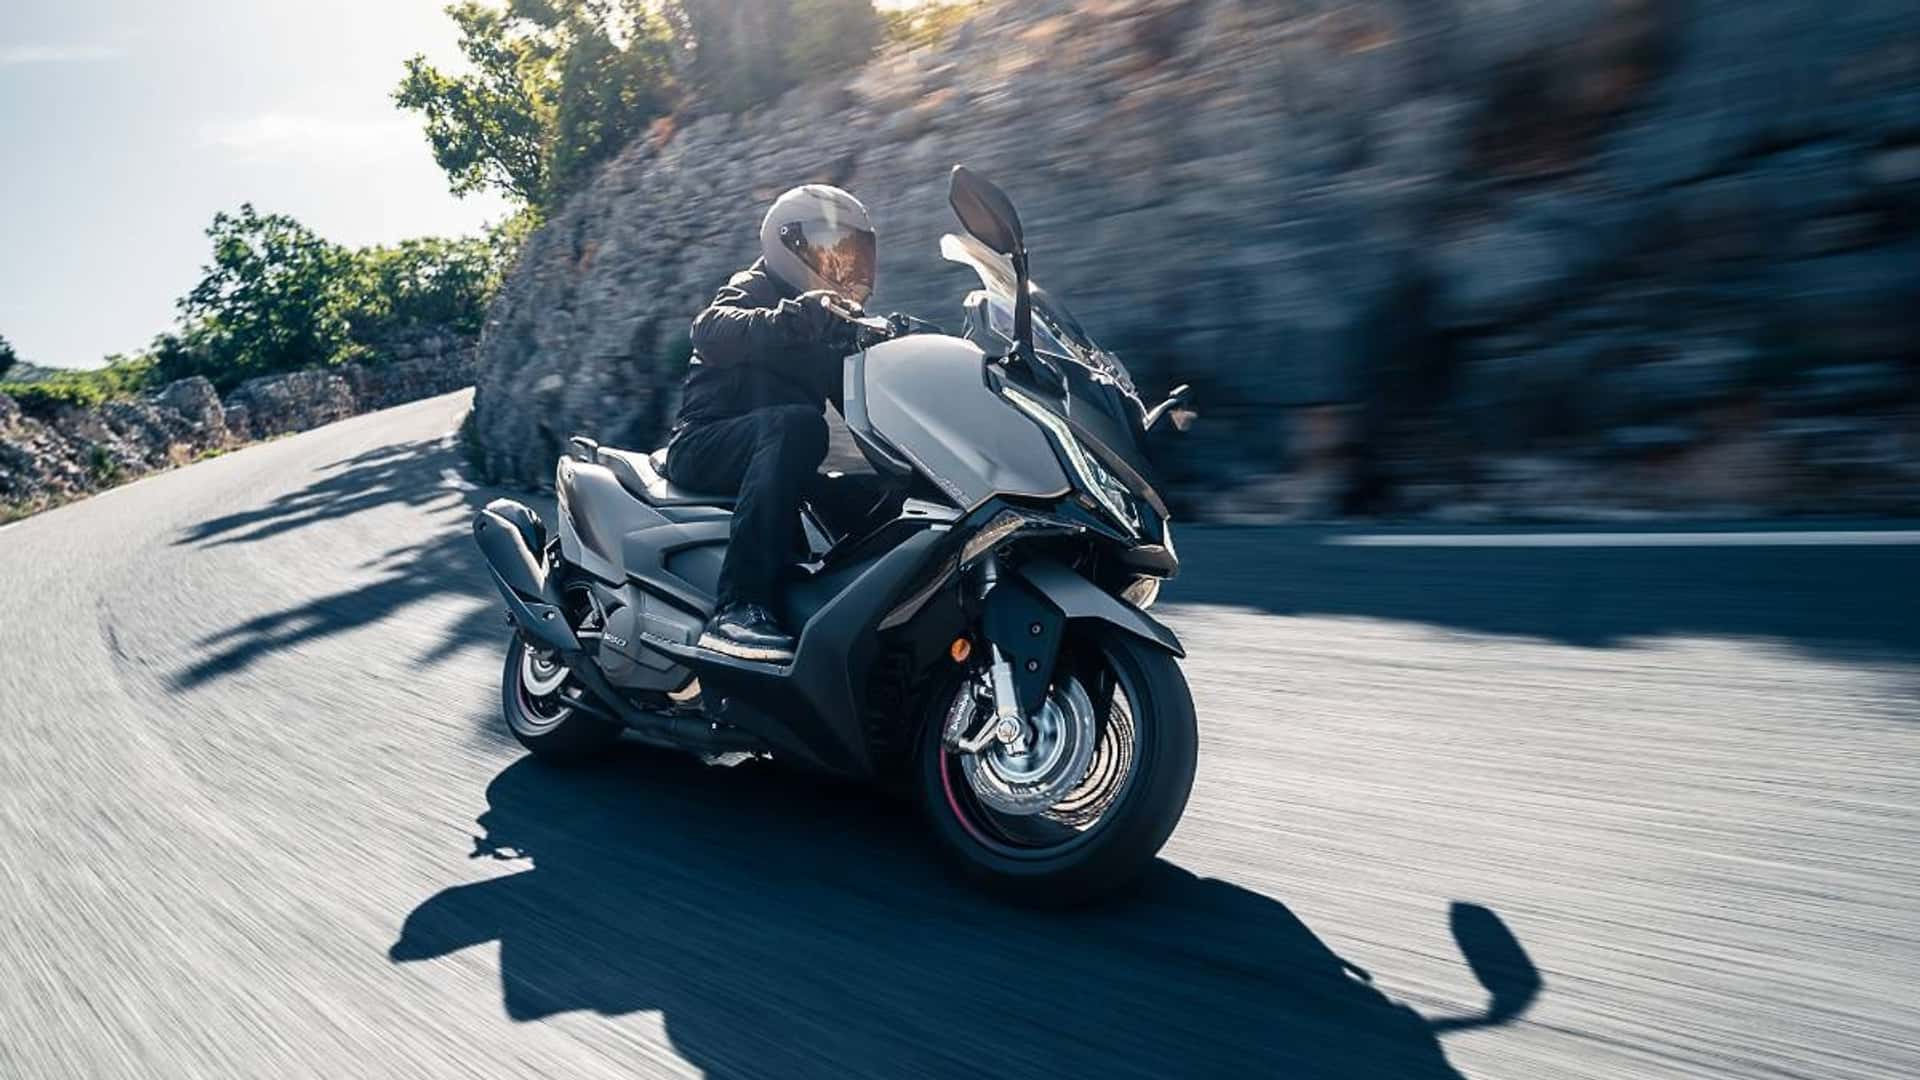 KYMCO AK 550 2023 gets a new look with the Premium version, taking on the Yamaha TMAX KYMCO AK 550 Premium 2023 (2).jpg